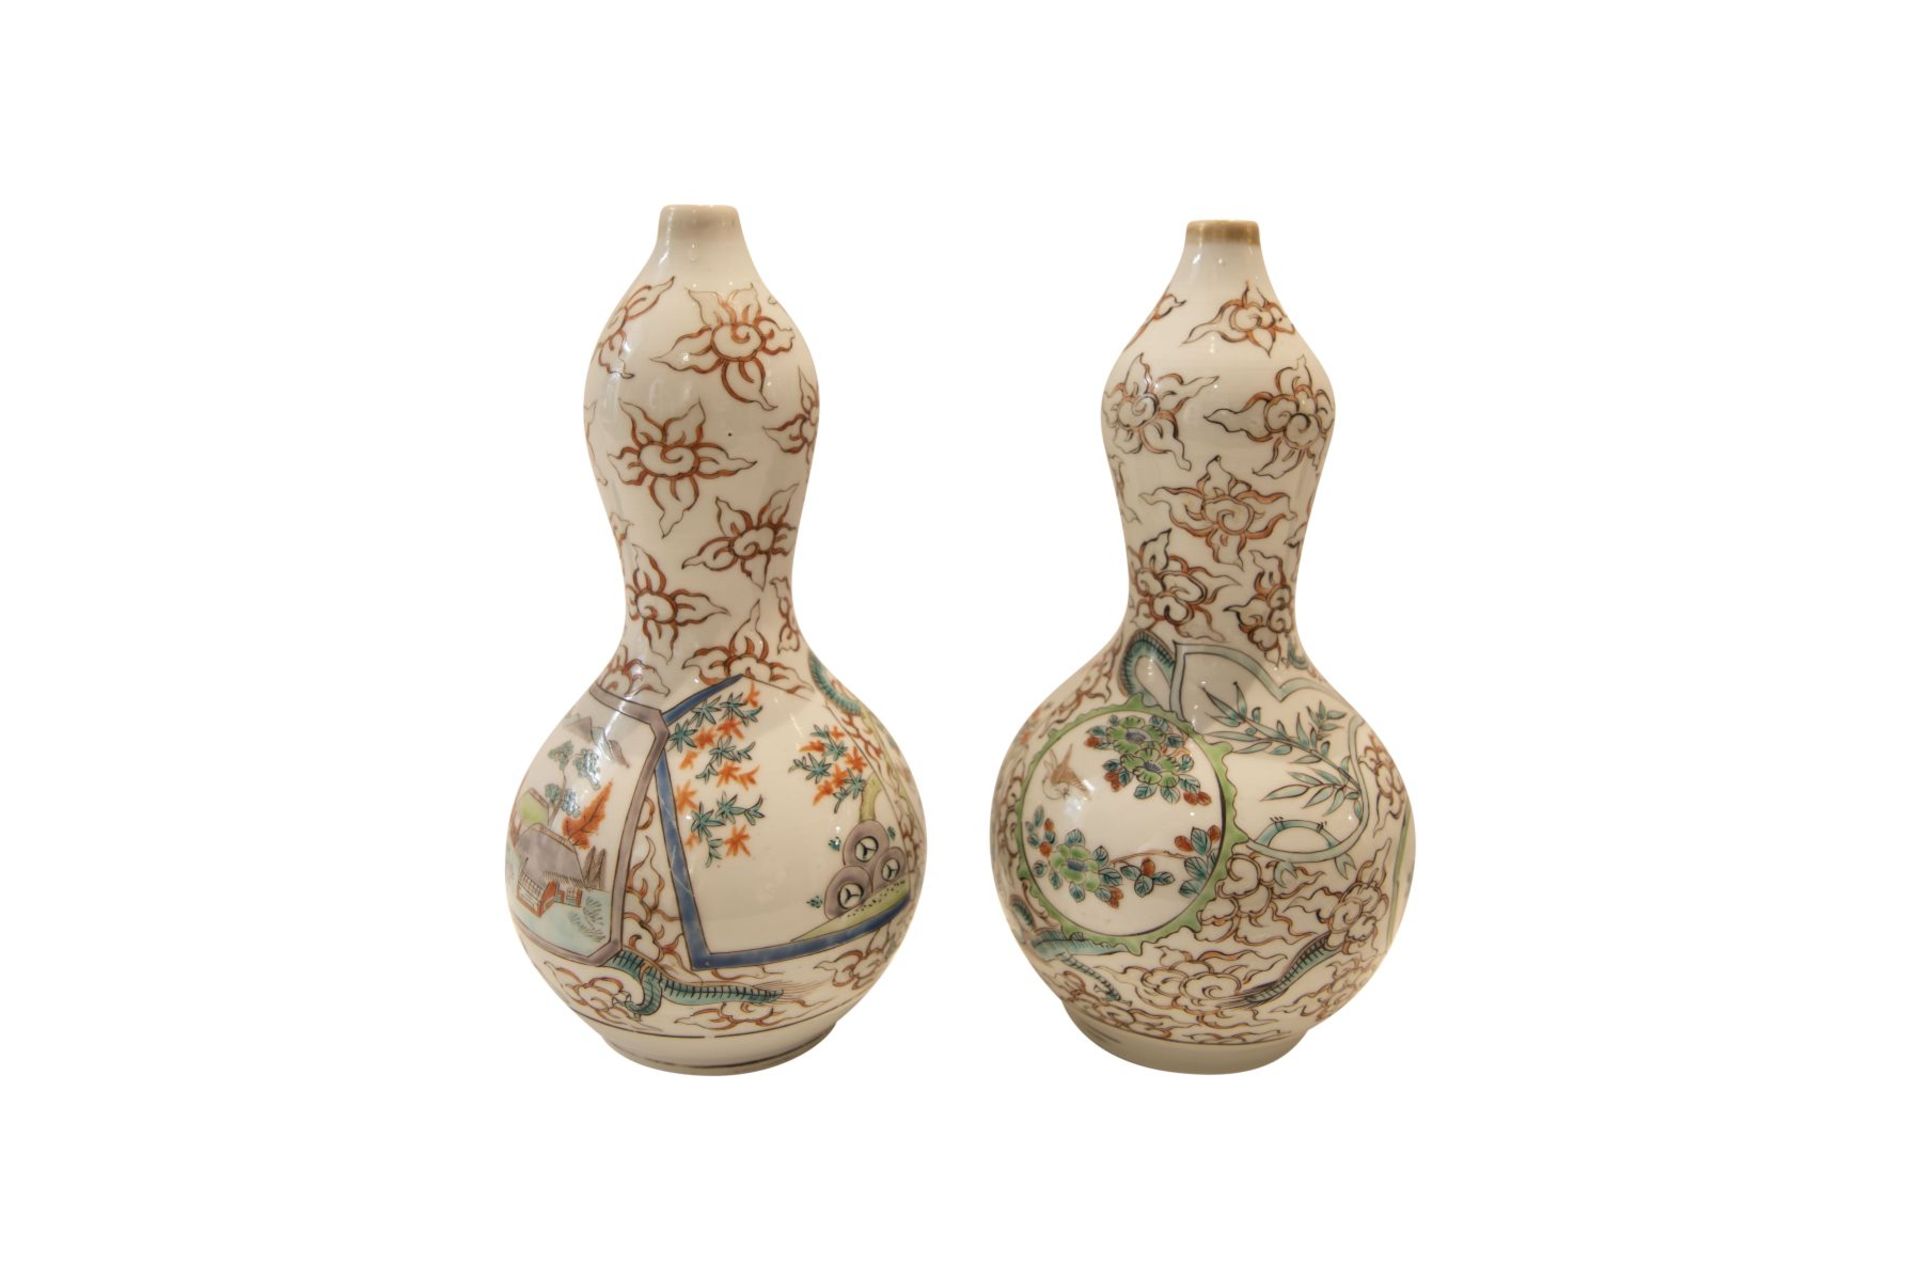 2 Asian vases - Image 3 of 5